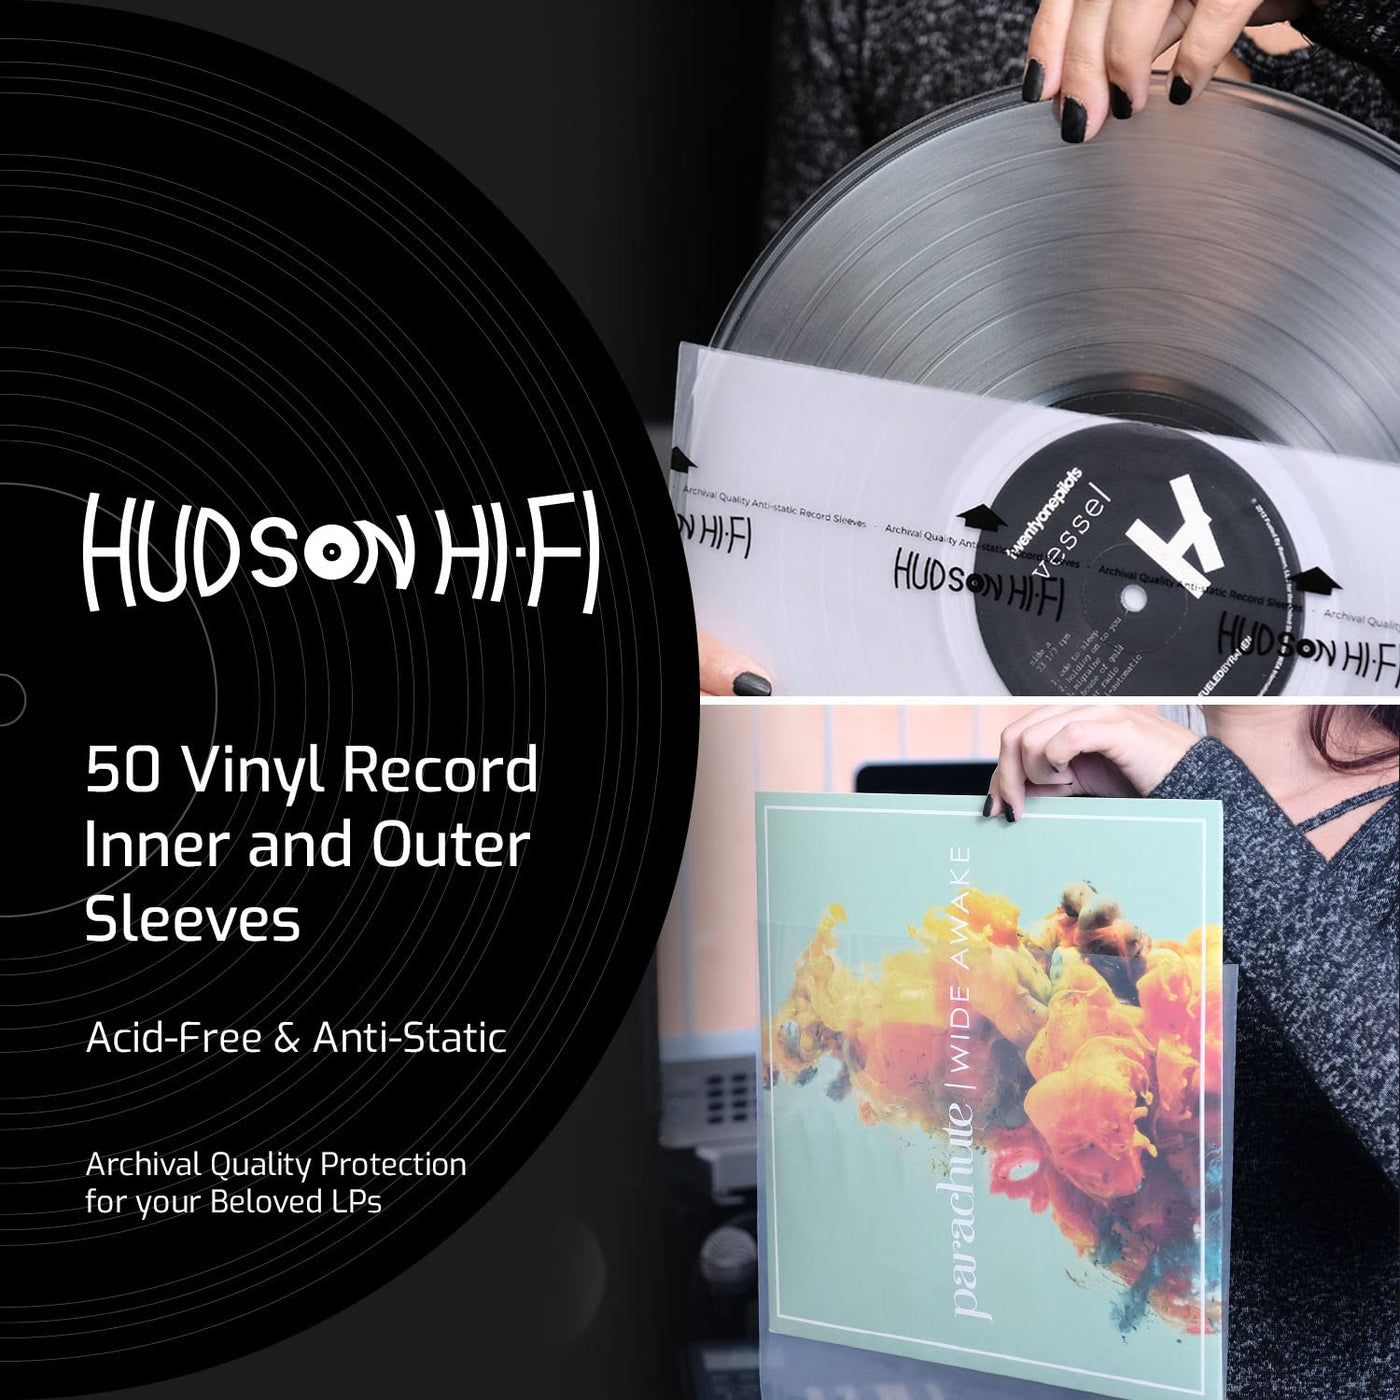 Hudson Hi-Fi Vinyl Record Outer Sleeves Covers - Premium Clear